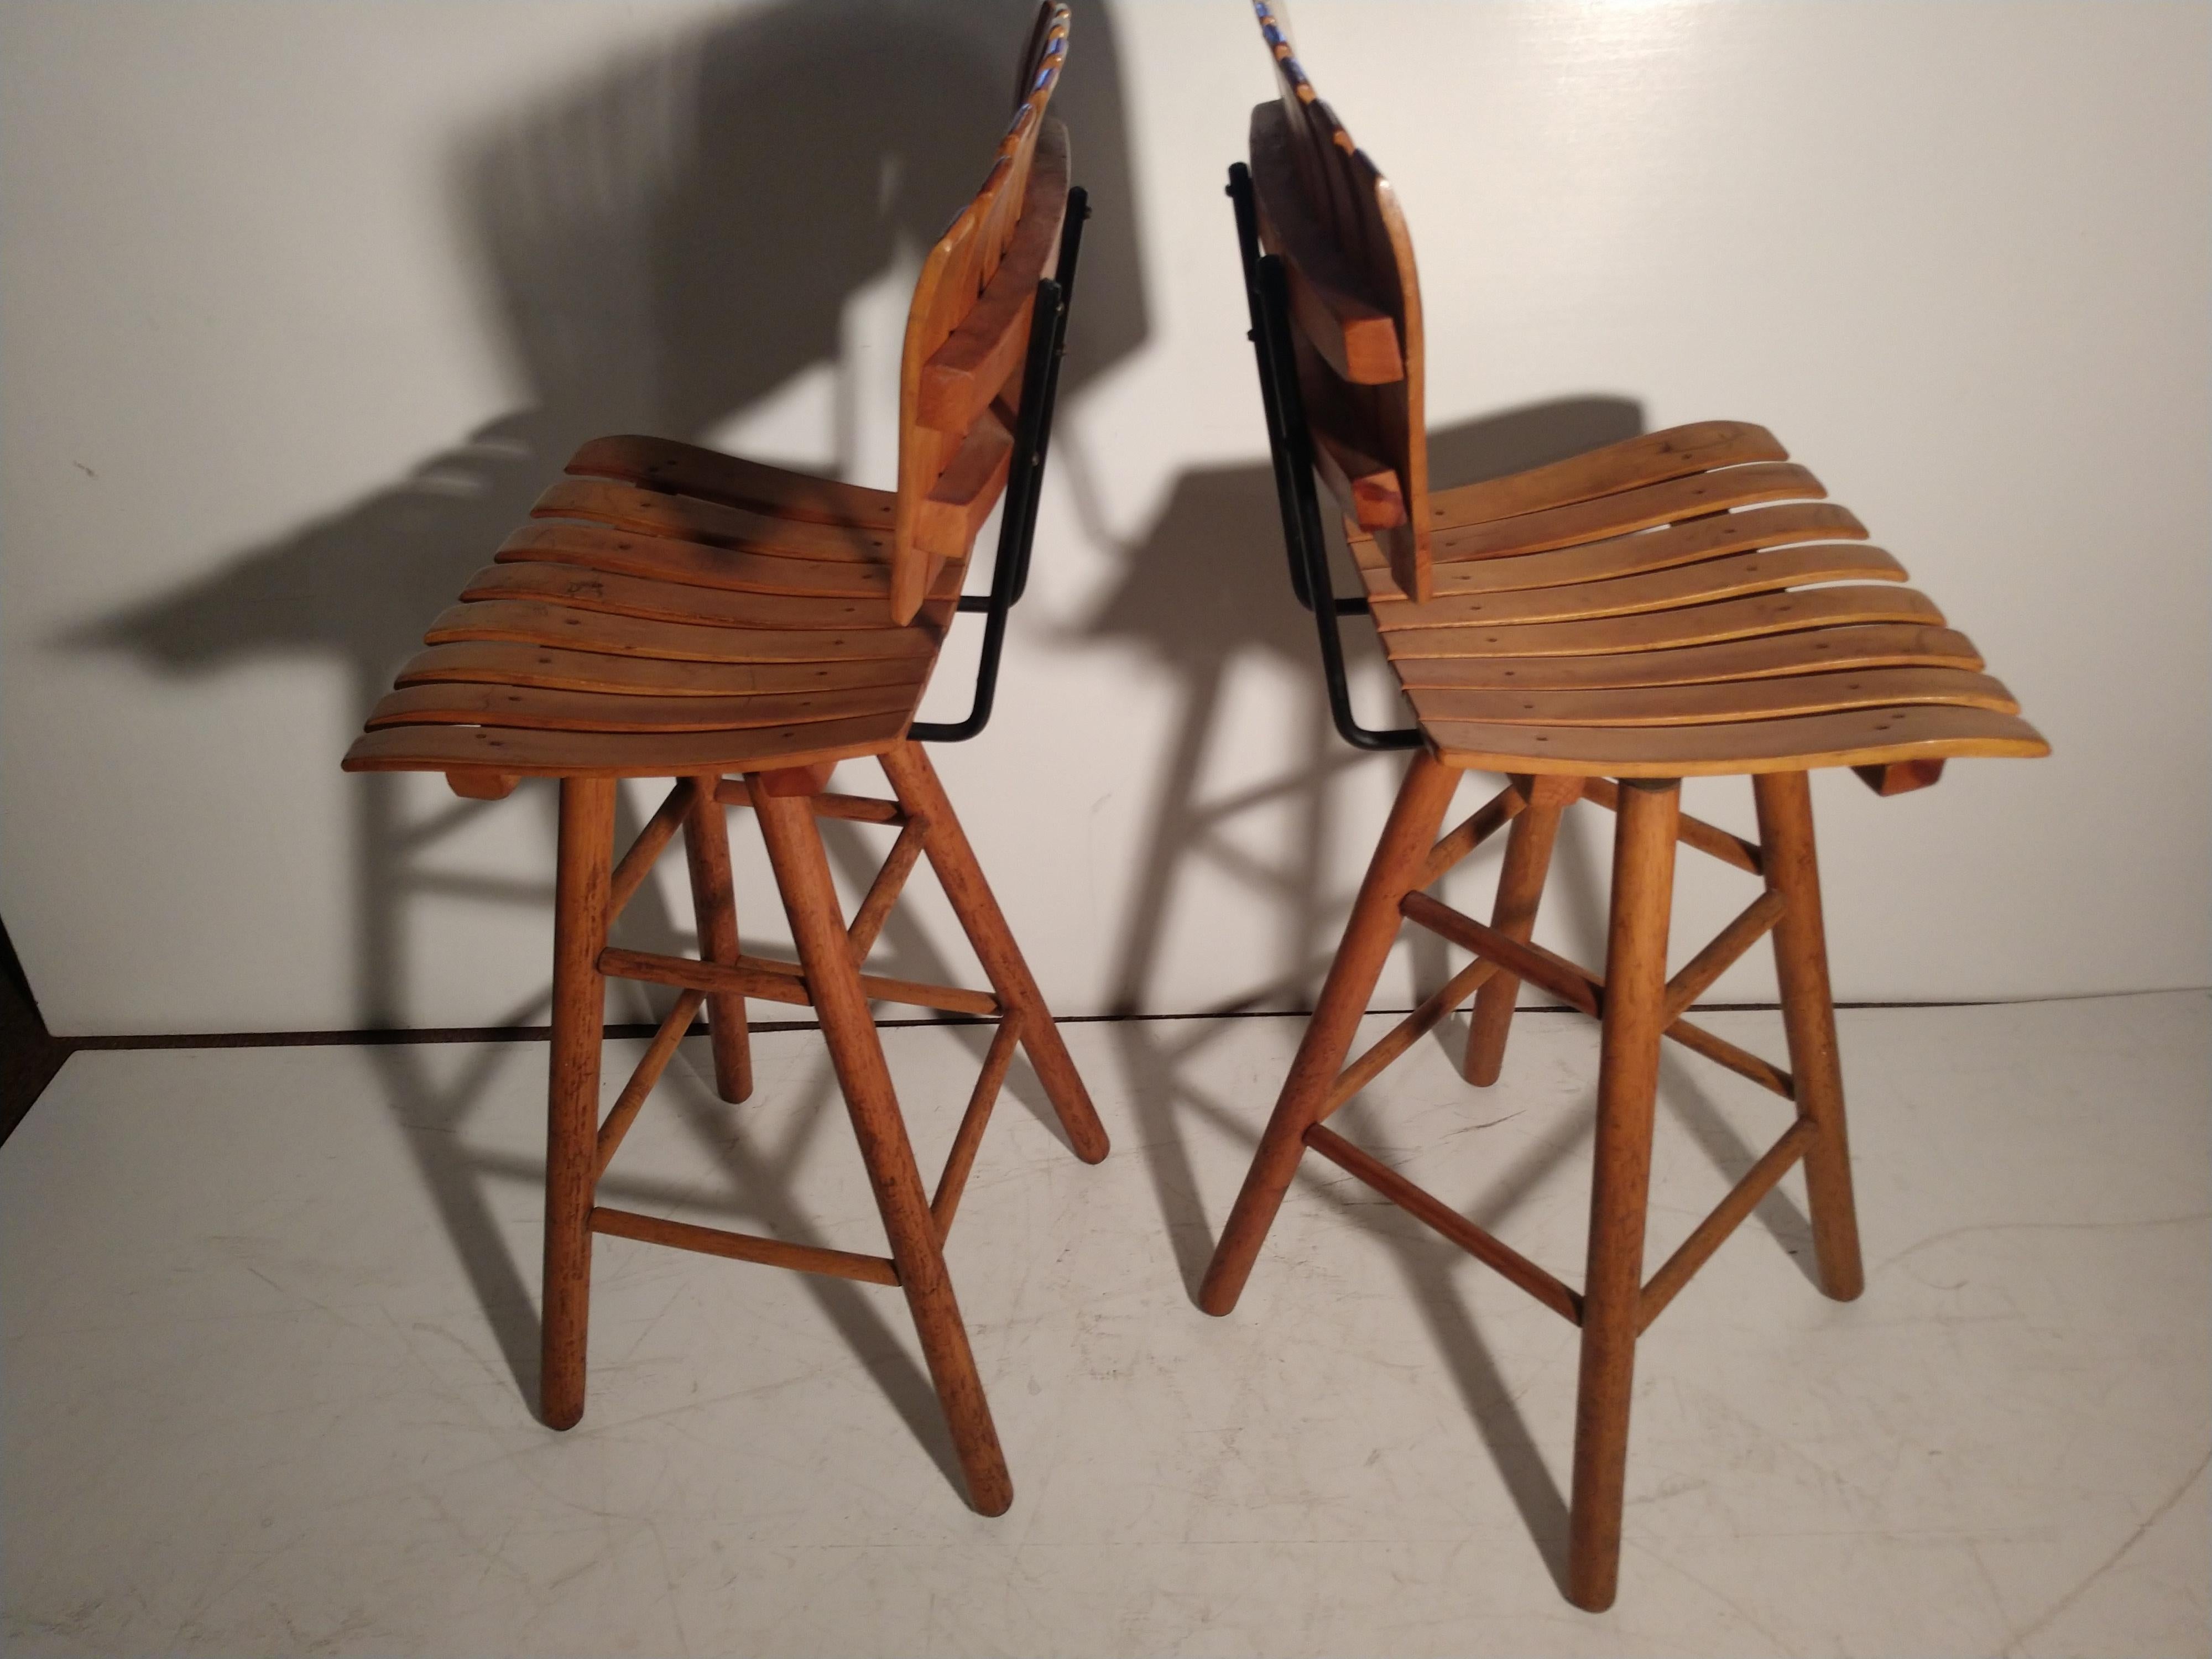 Fabulous pair of Mid-Century Modern bar stools created out of maple seat height is 30in. Heavy duty wood legs, well made. In excellent vintage condition with minimal wear. They swivel.